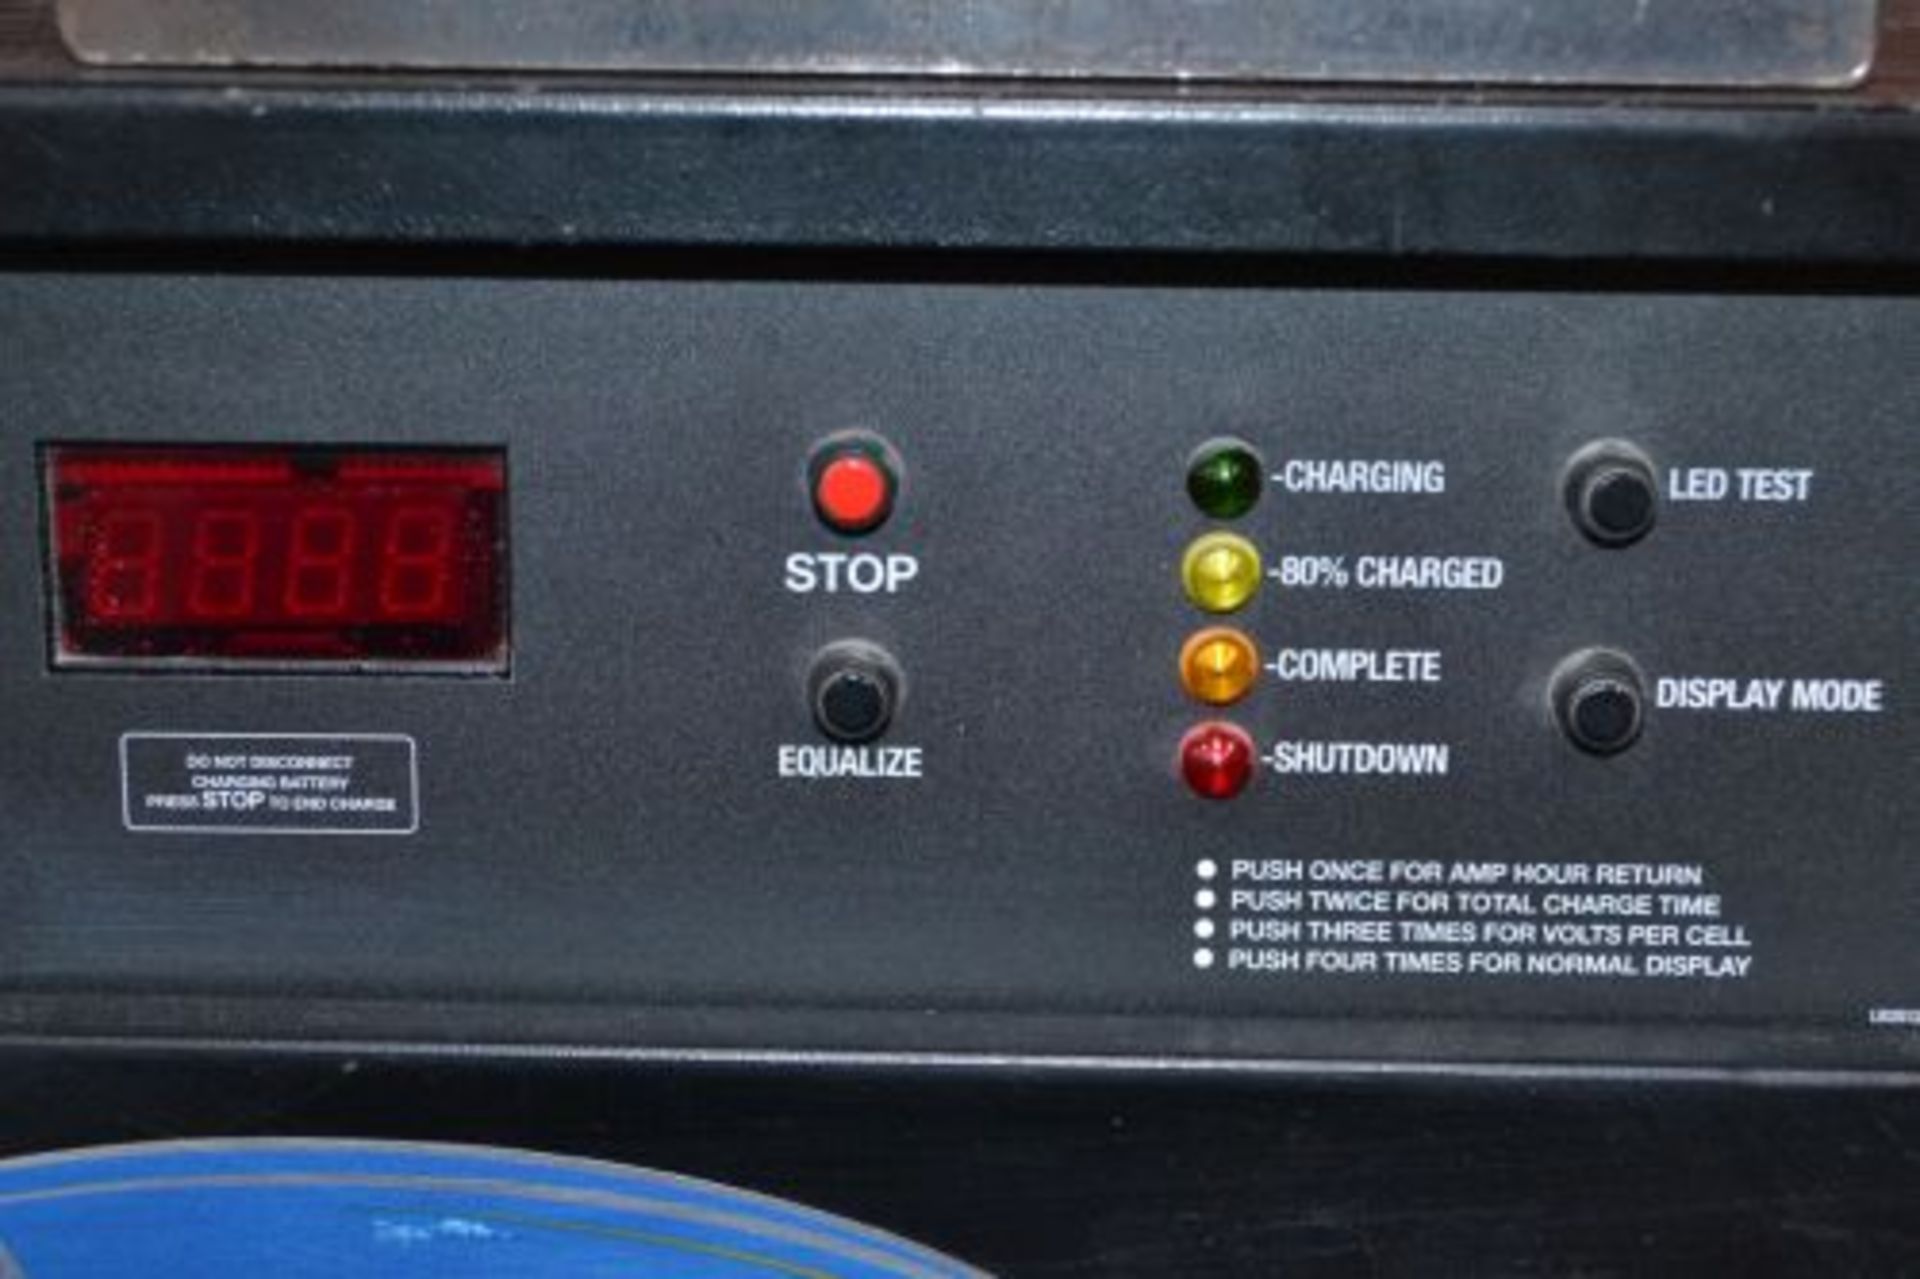 Applied Energy Solutions Workhorse 24 volt battery charger - Image 4 of 5